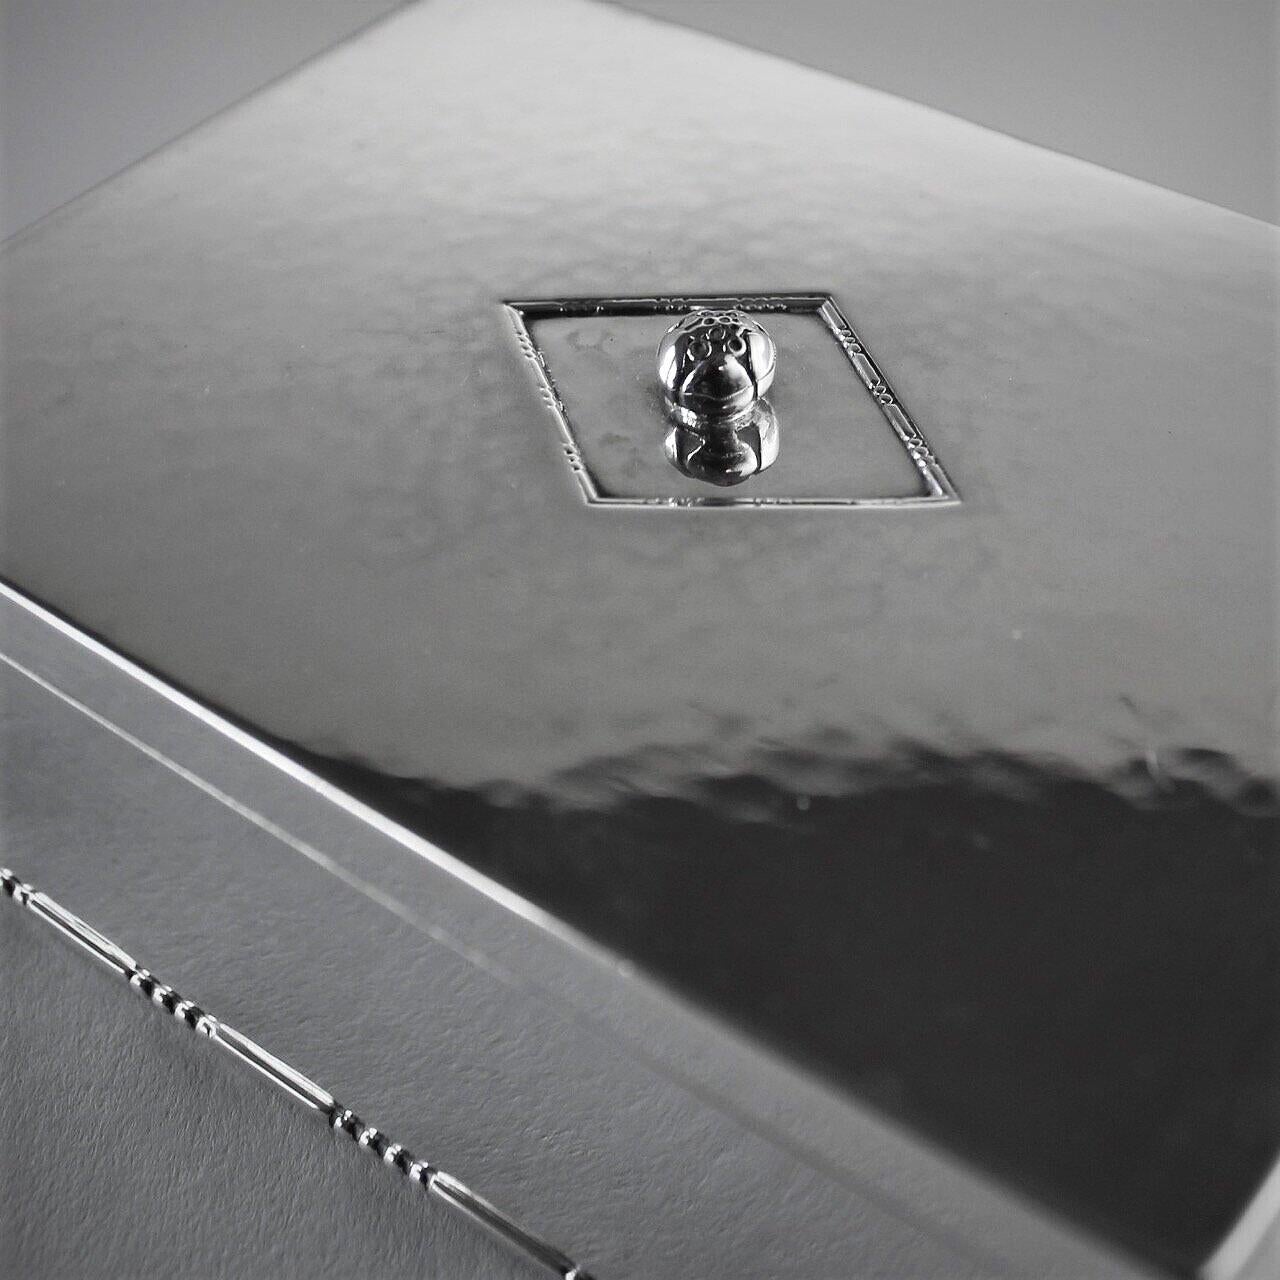 Georg Jensen sterling silver Keepsake box, No.329

A similar example can be seen in the book Georg Jensen HOLLOWARE, The Silver Fund collection by David Taylor and Jason Laskey, pg 233.

Designer: Georg Jensen
Maker: Georg Jensen
Design #: